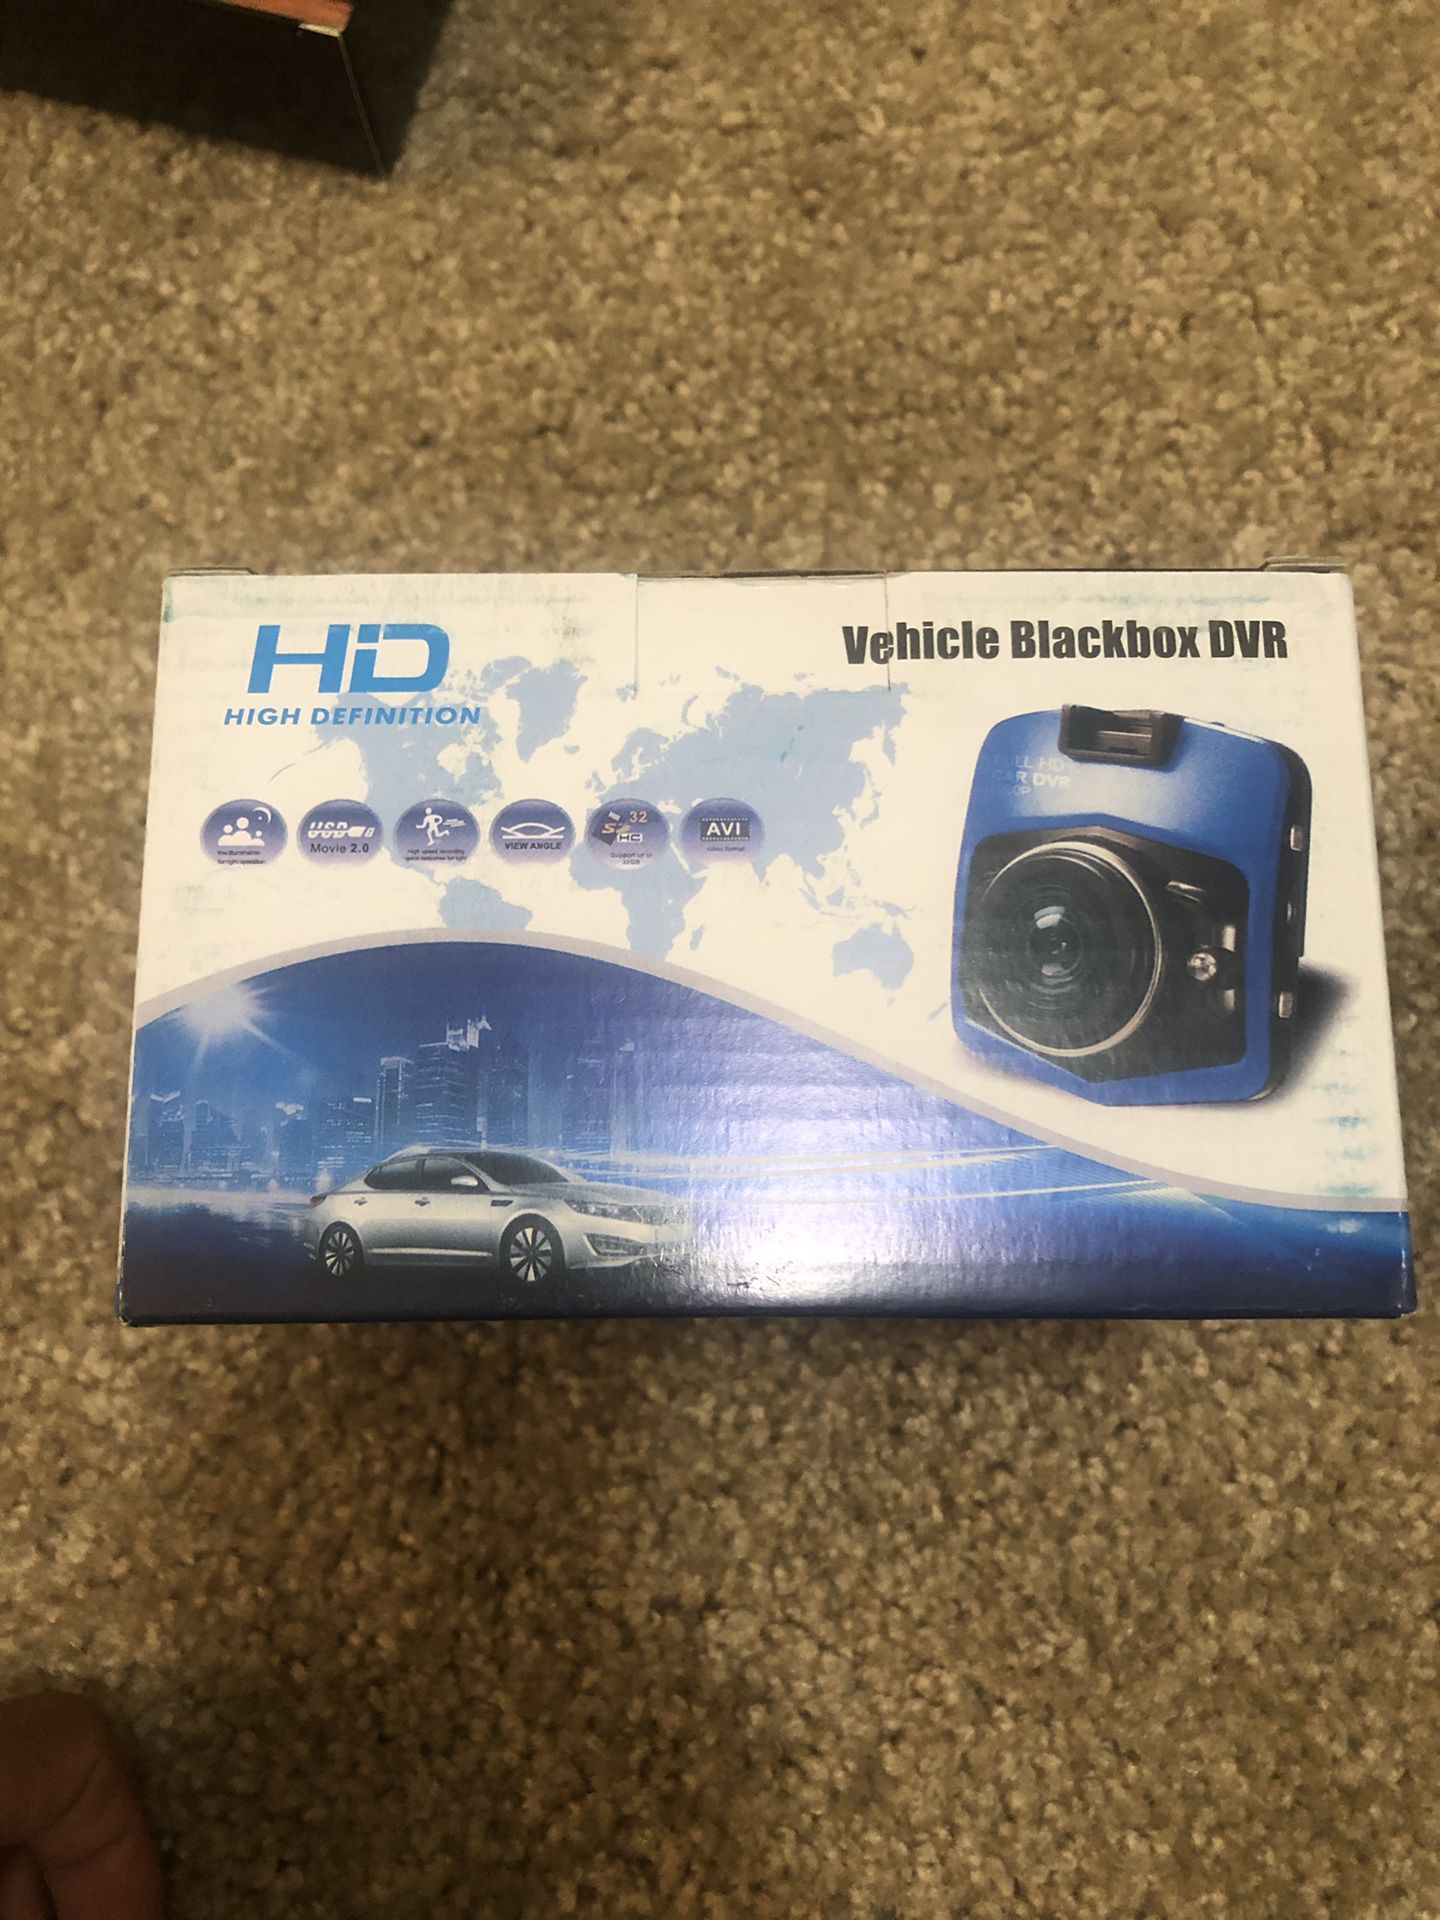 HK Dash Cam for Cars with Night Vision 1080P FHD DVR Vehicle Driving Recorder Mini Dashboard Camera 2.4" LCD Screen 170 Degree Wide Angle,Parking Mon